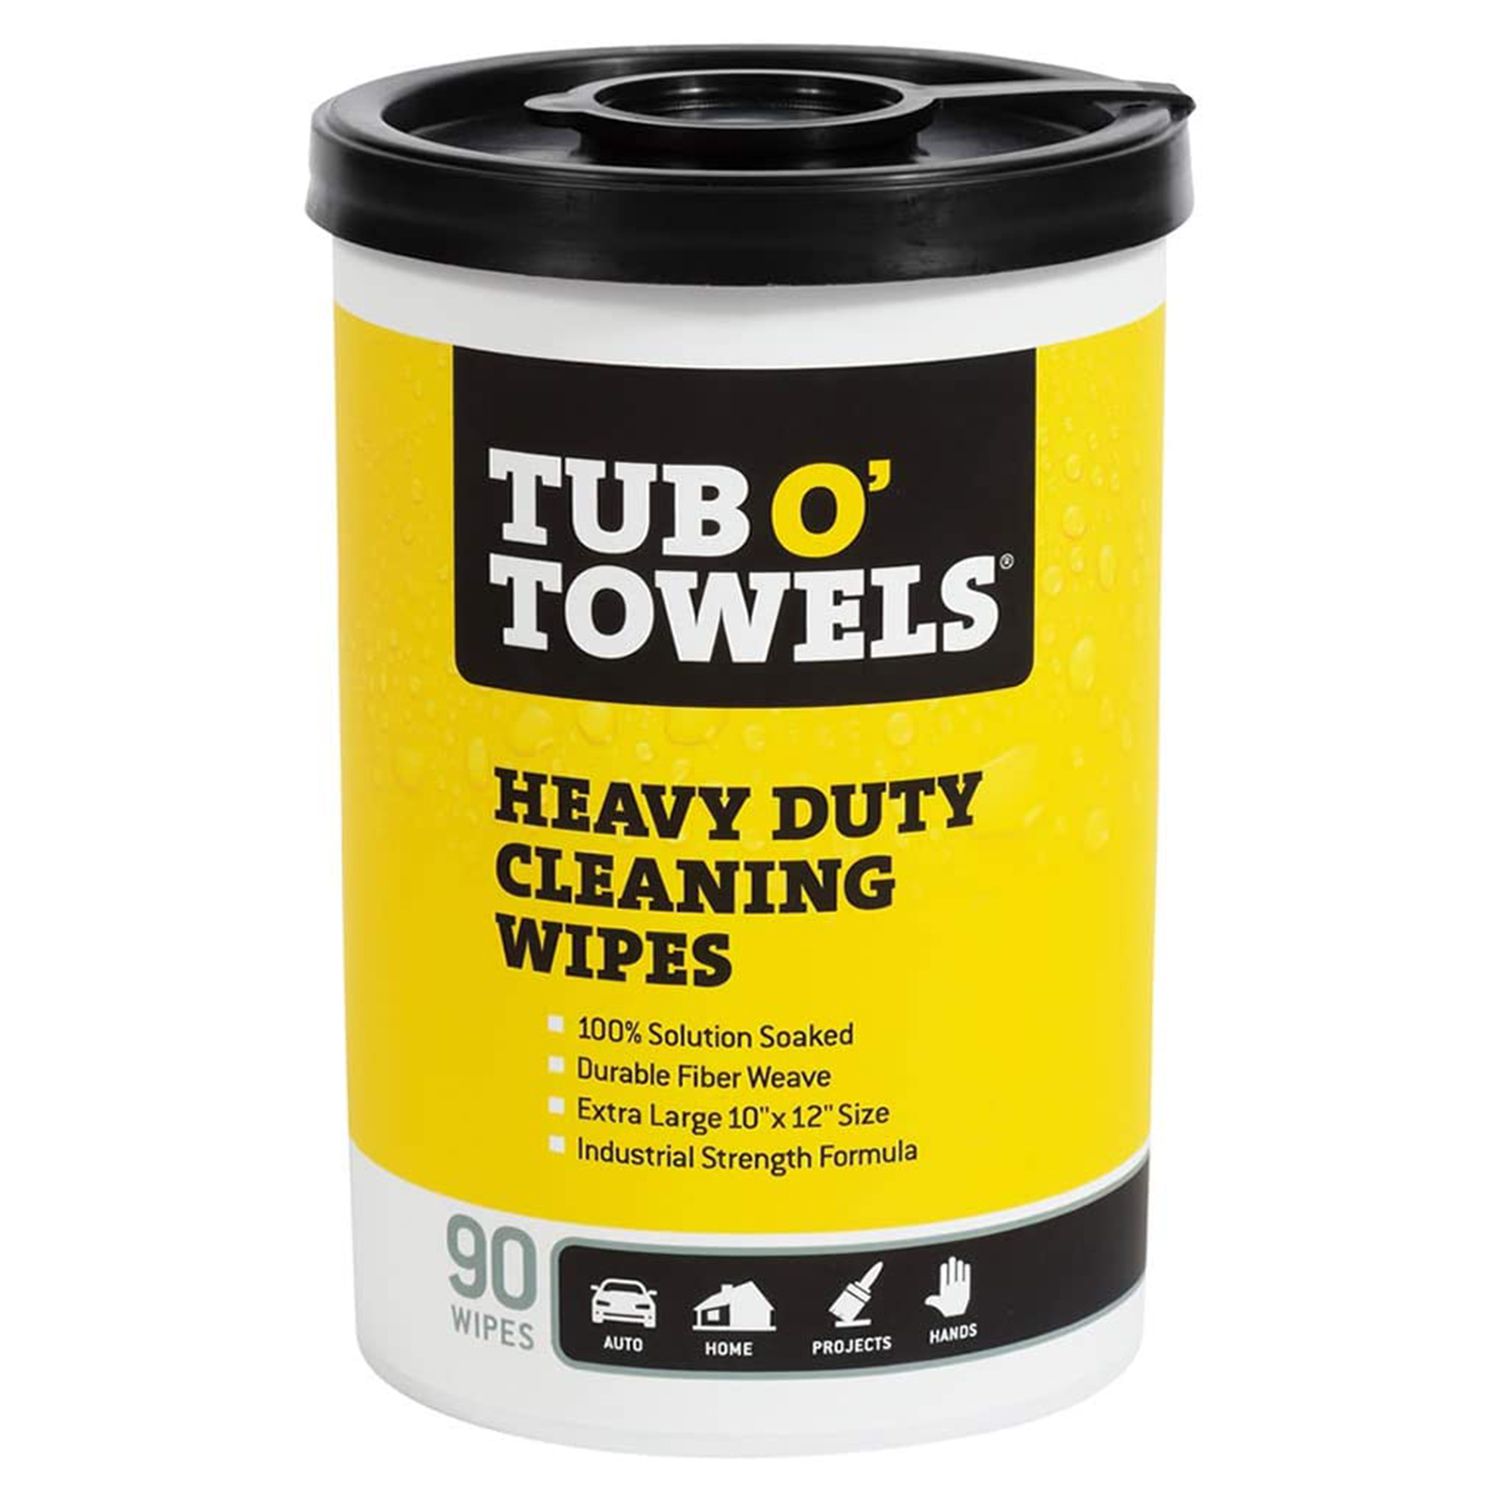 Tub O Towels Heavy-Duty 10" x 12" Size Multi-Surface Cleaning Wipes